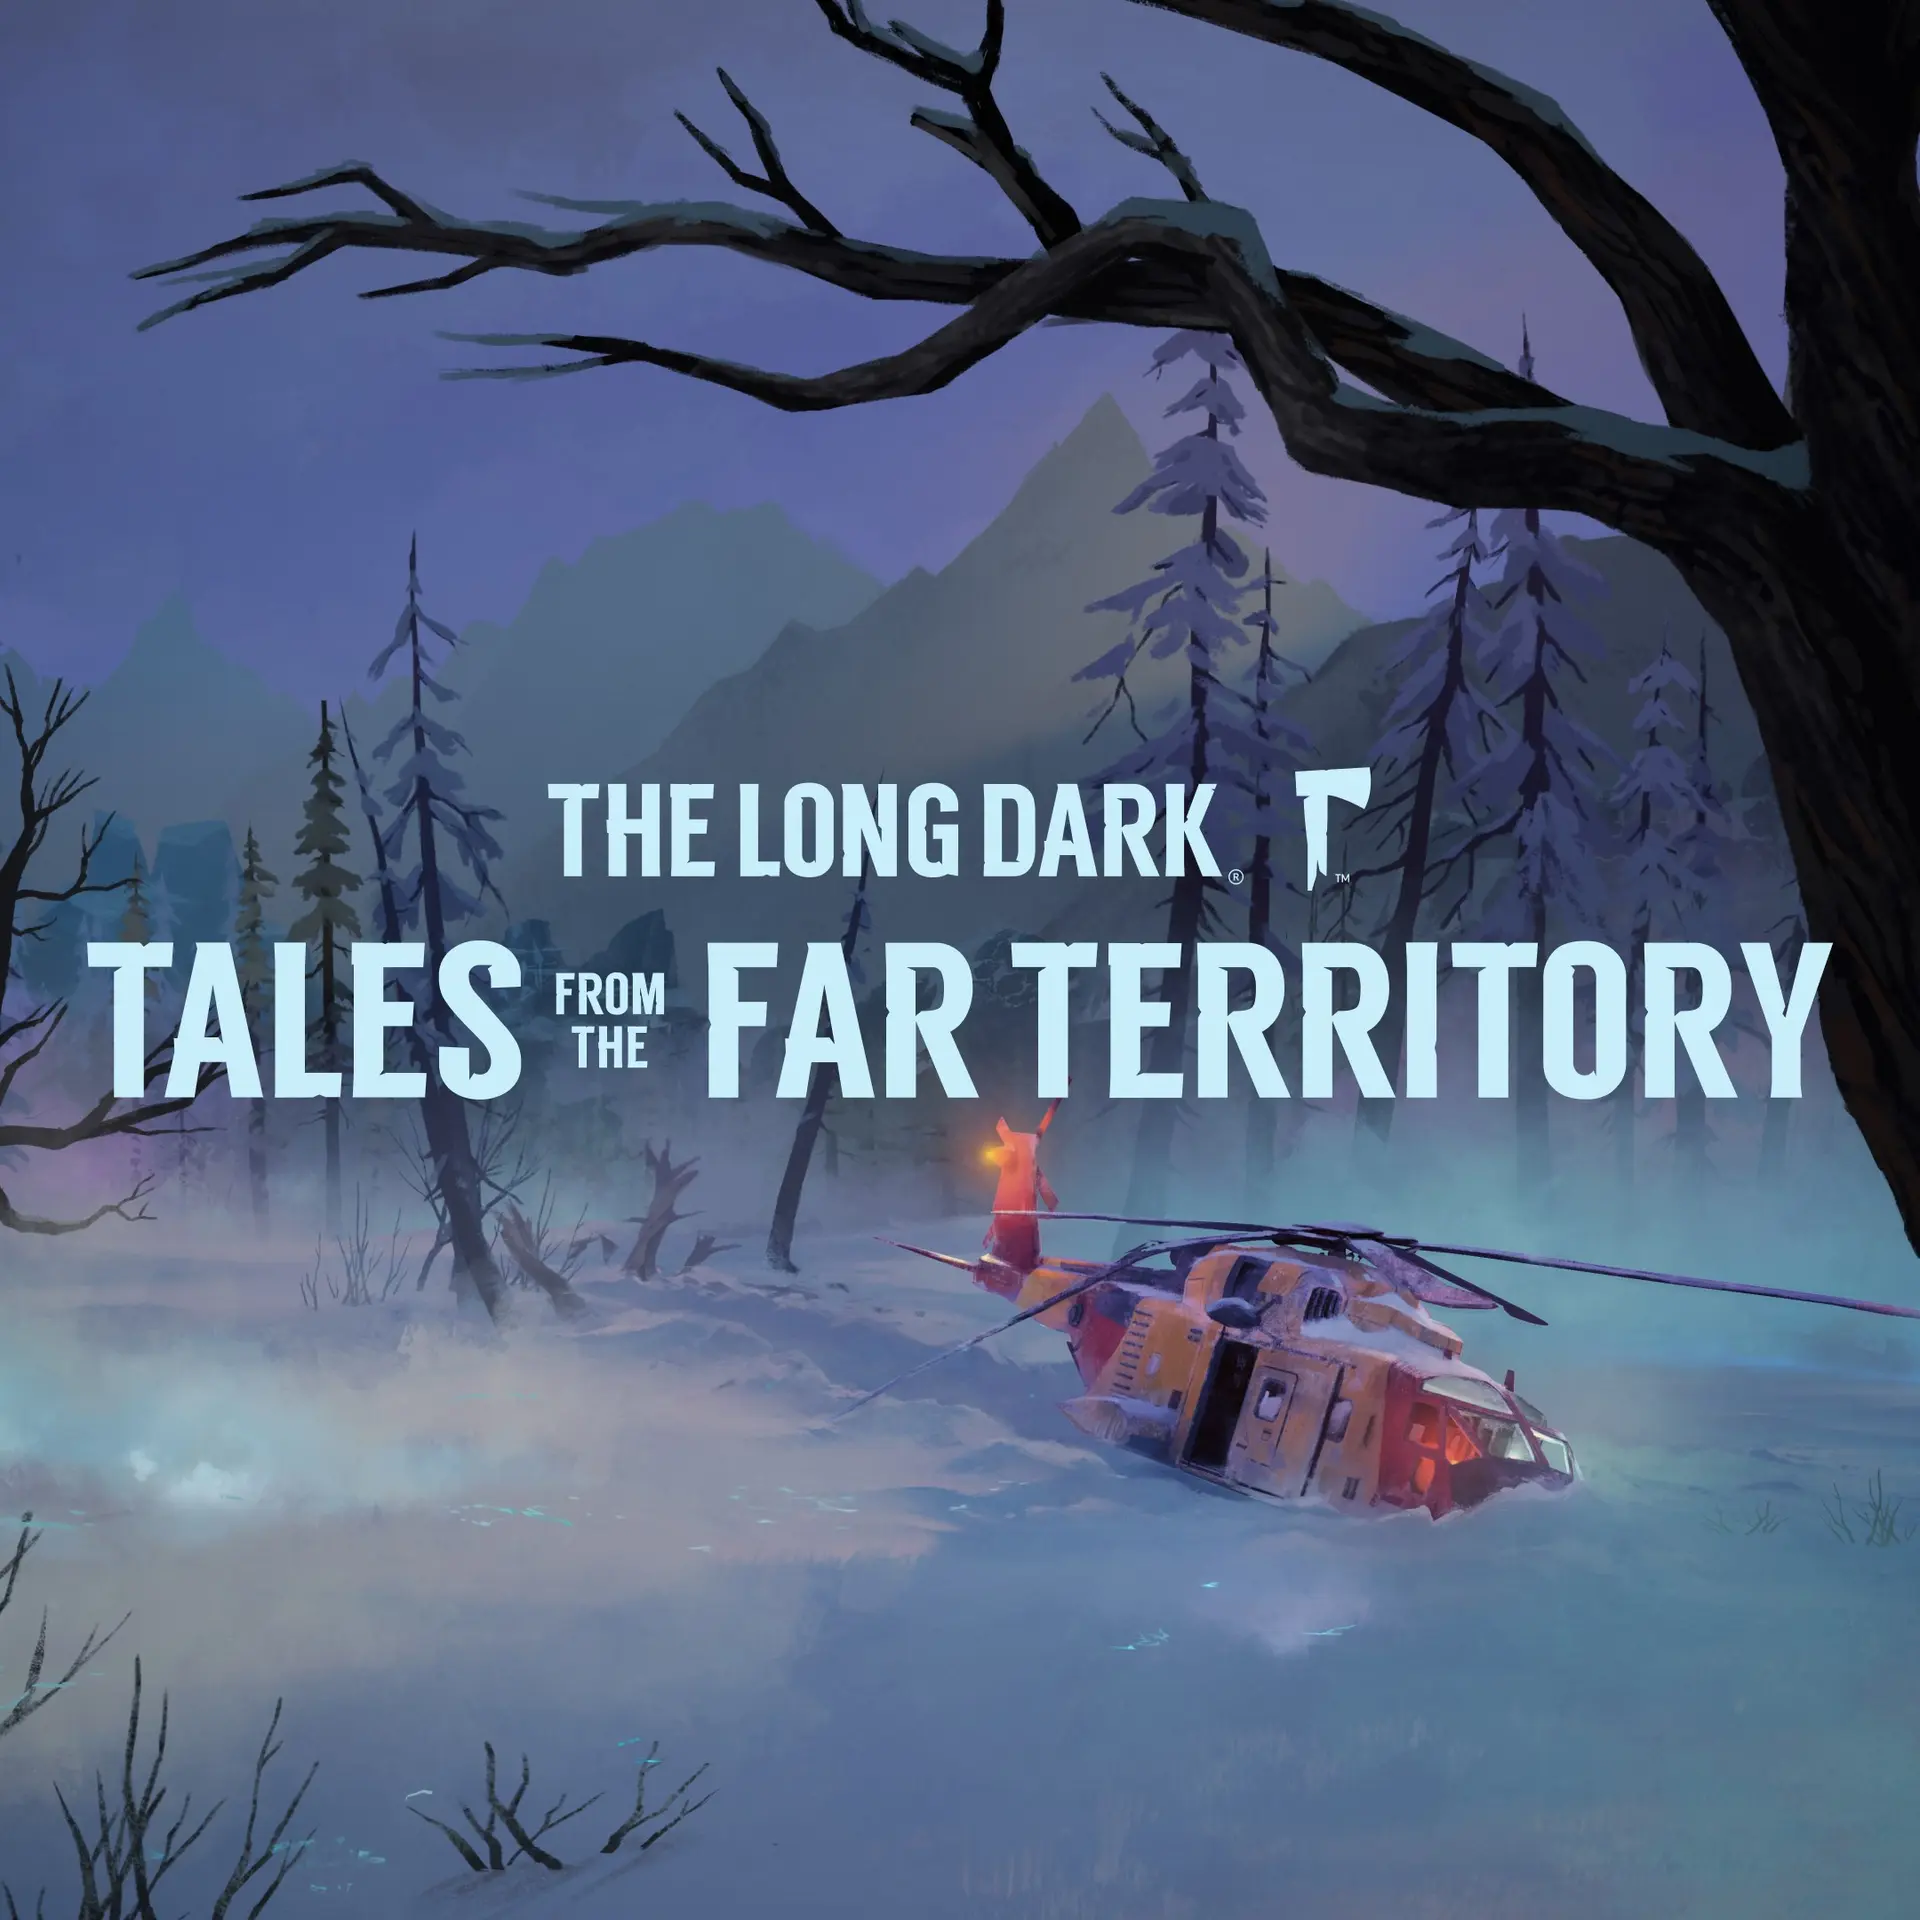 The Long Dark: Tales from the Far Territory (XBOX One - Cheapest Store)